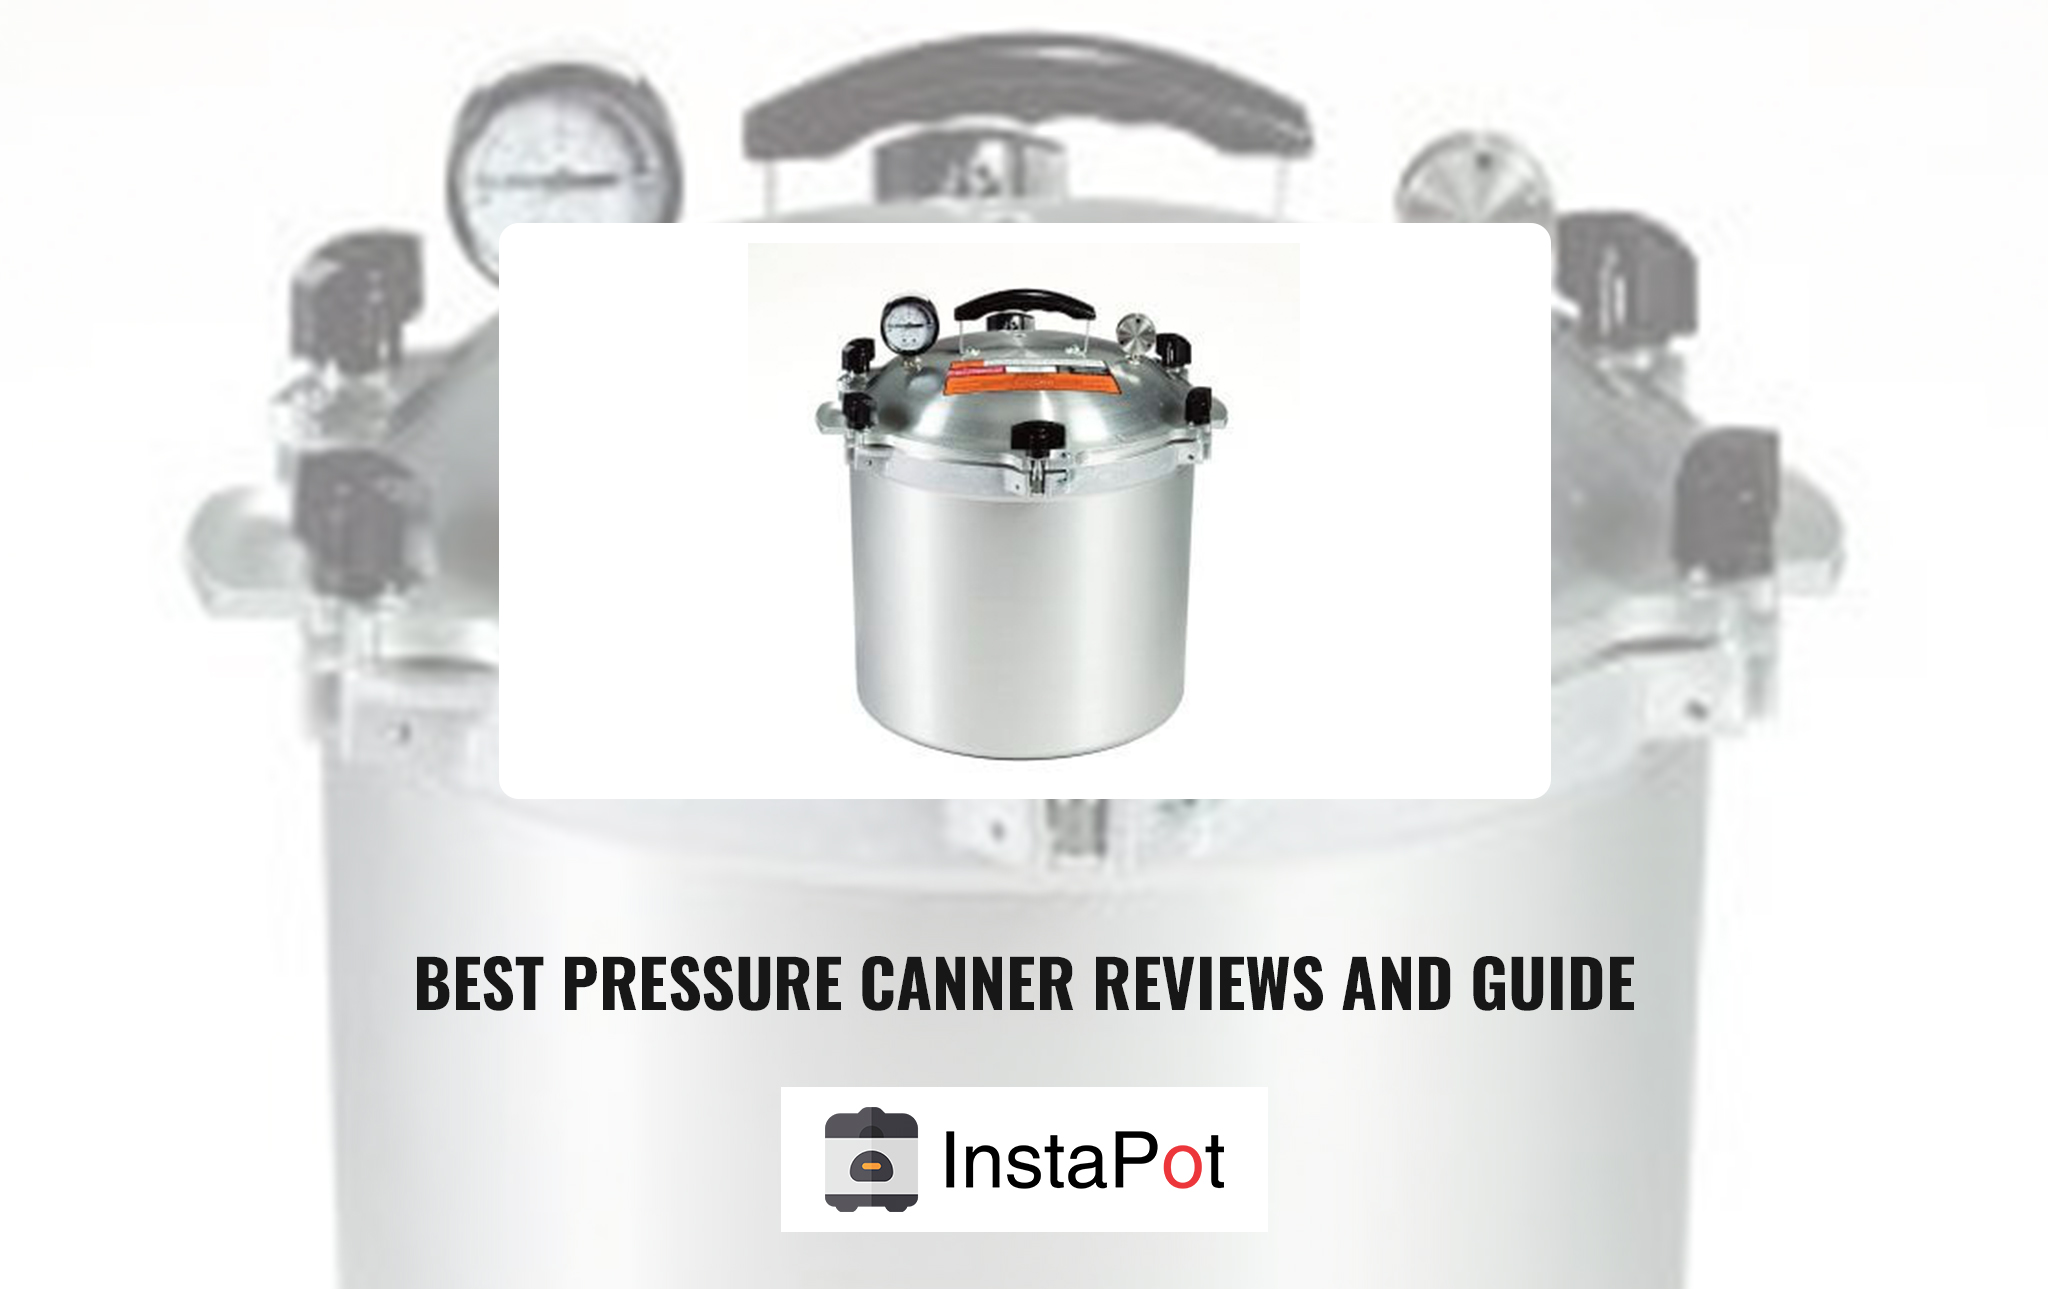 Best Pressure Canner Reviews and Guide